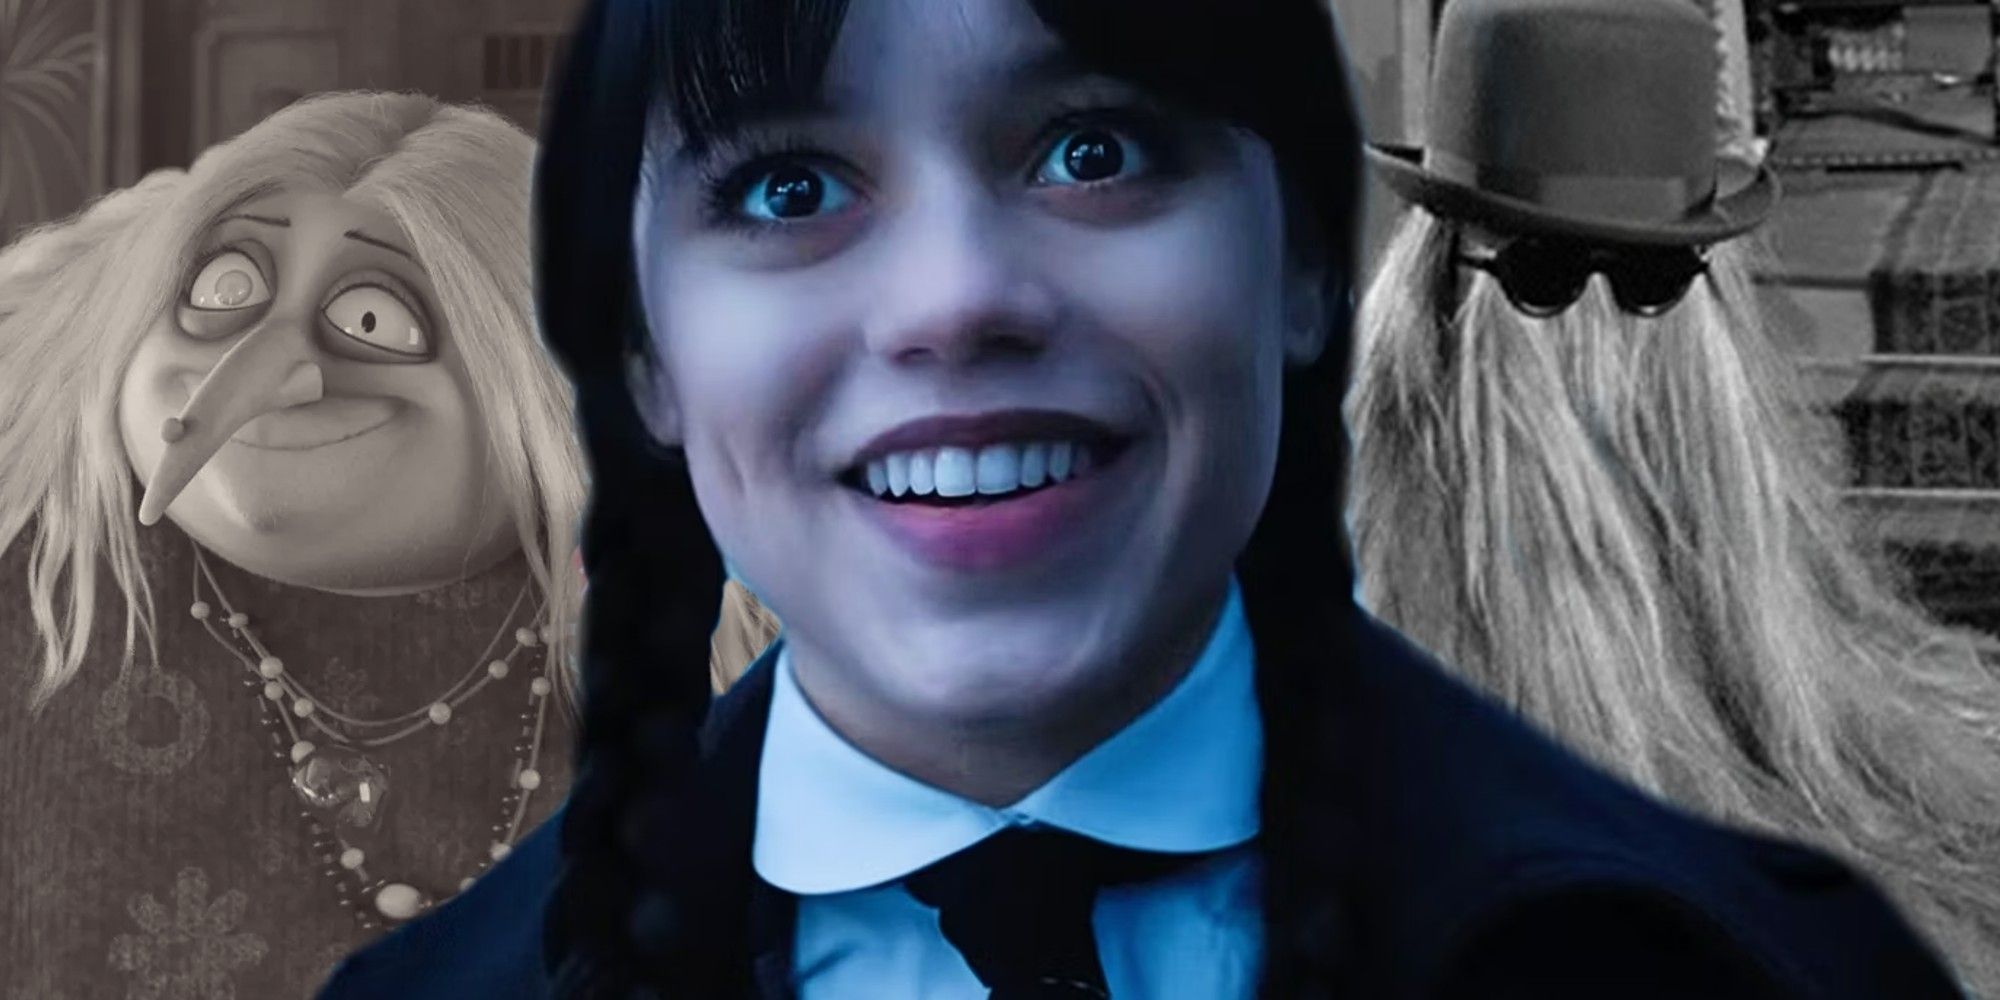 Wednesday to Introduce a New Addams Family Relative in Season 2 — But Who?